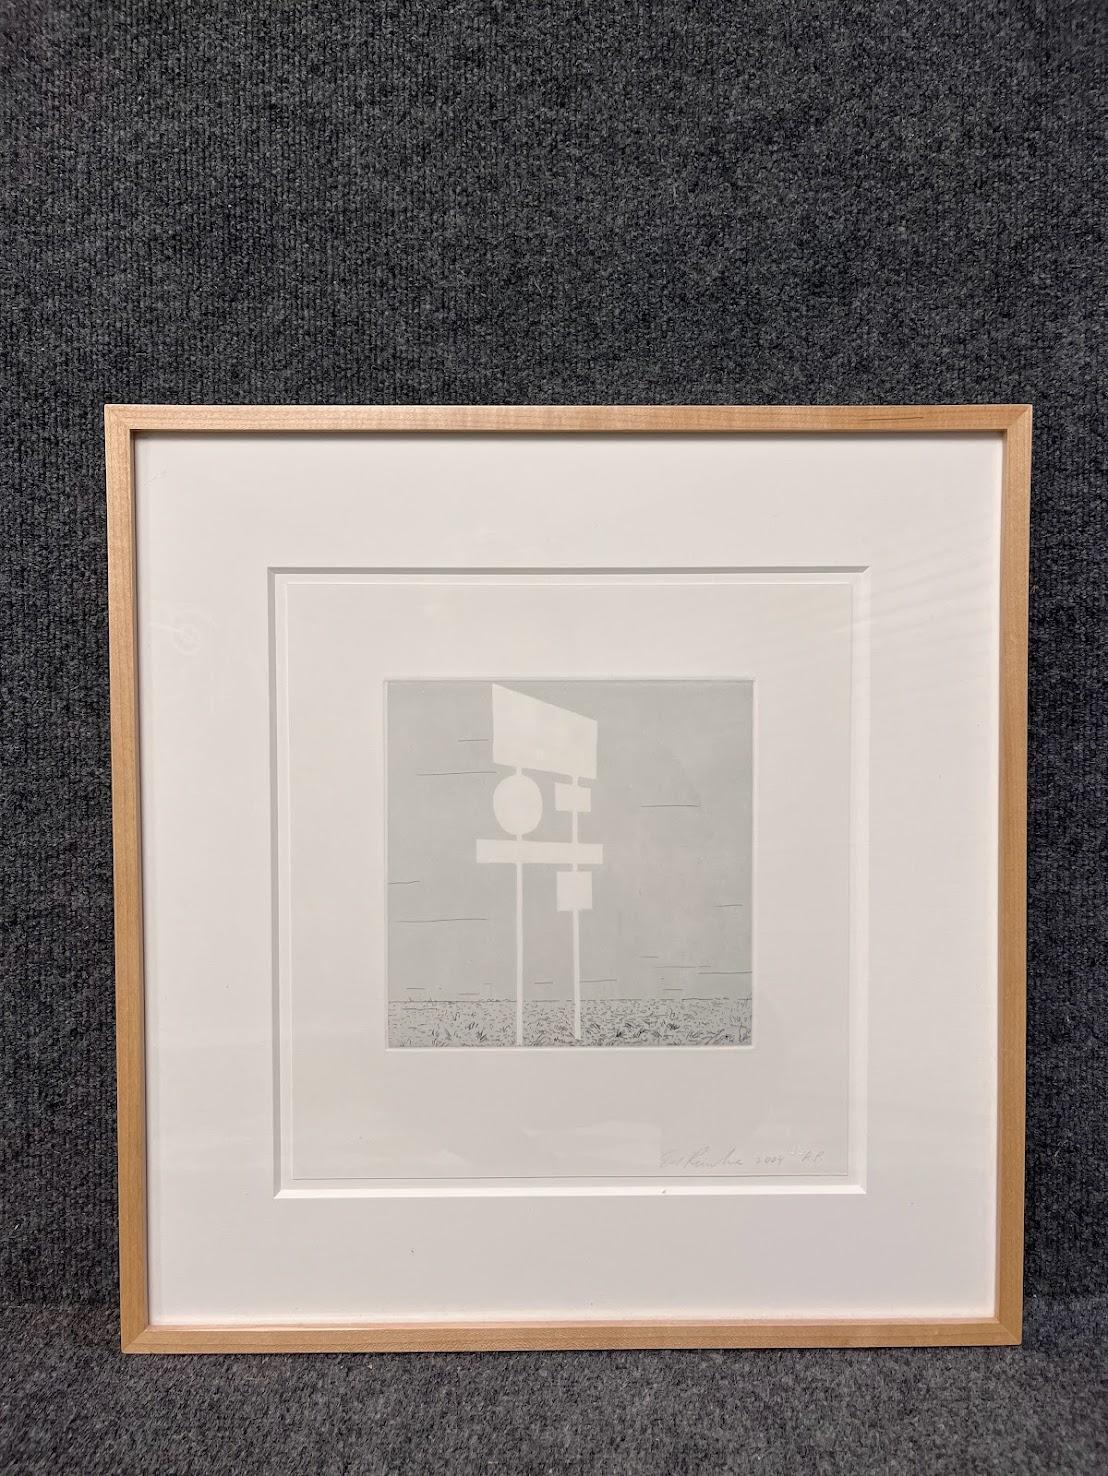 Ed Ruscha 'Blank Signs' Signed Etching and Aquatint Four Framed Prints 2004 For Sale 14